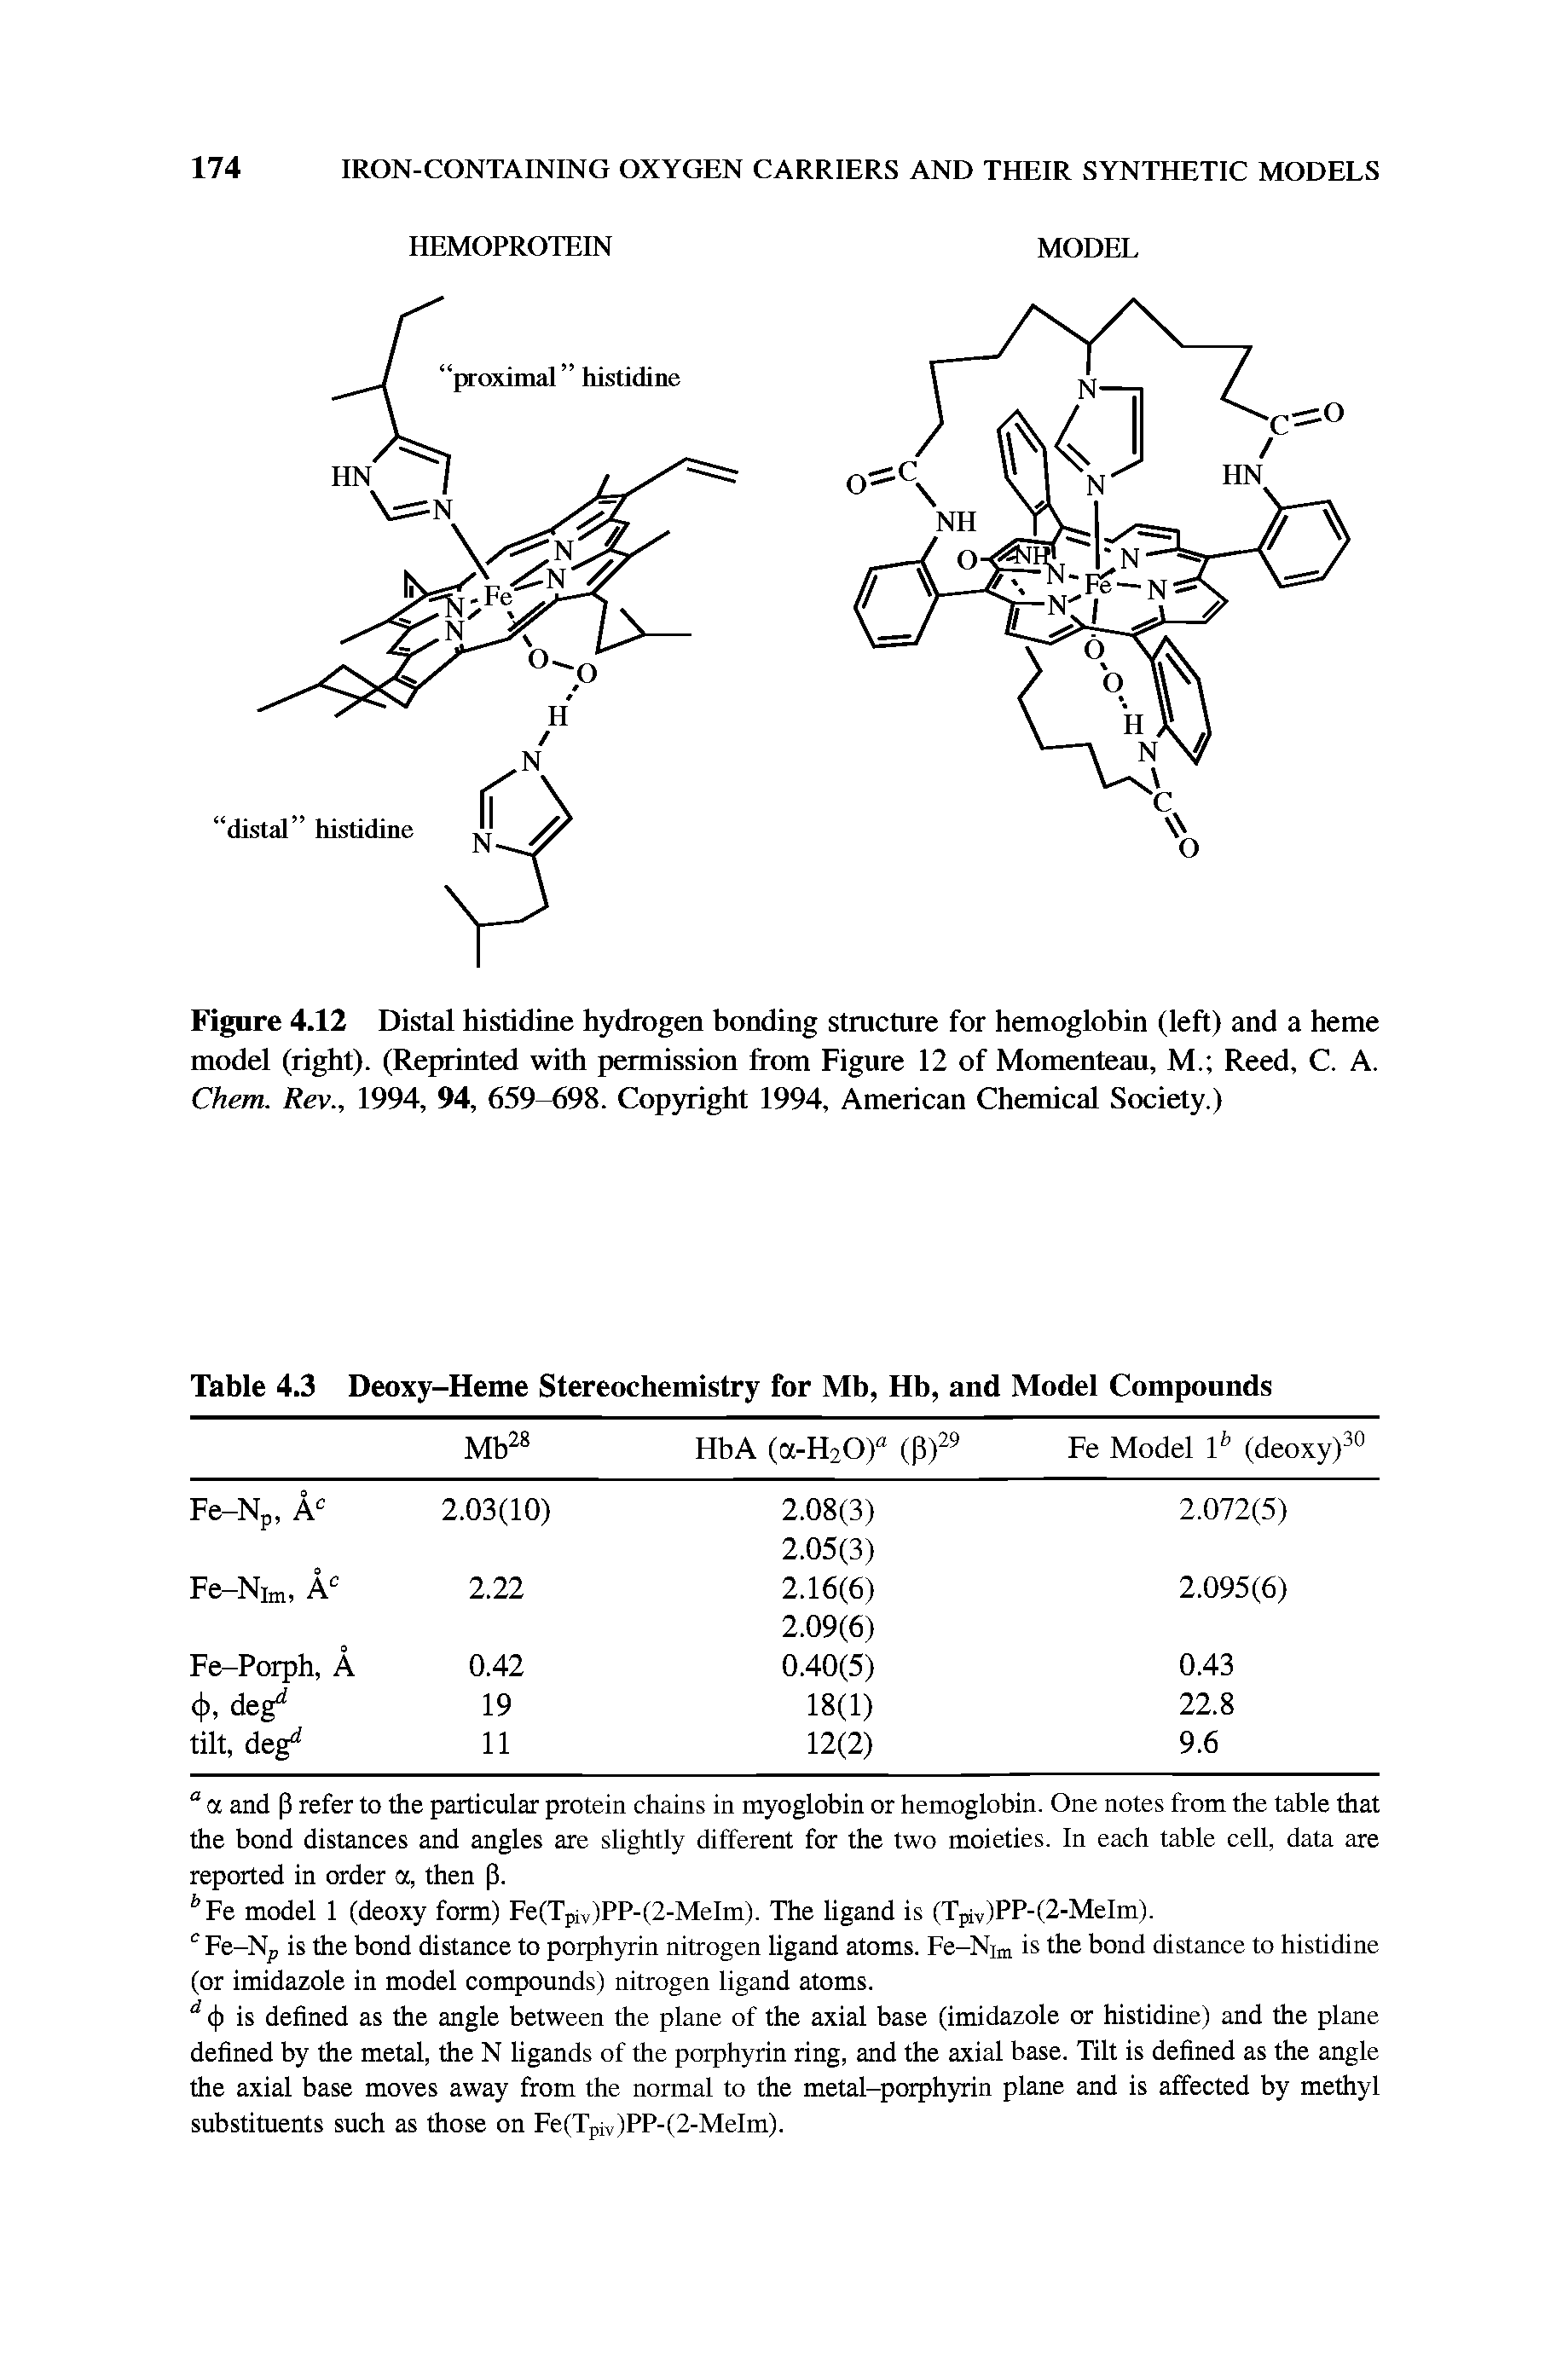 Figure 4.12 Distal histidine hydrogen bonding structure for hemoglobin (left) and a heme model (right). (Reprinted with permission from Figure 12 of Momenteau, M. Reed, C. A. Chem. Rev., 1994, 94, 659-698. Copyright 1994, American Chemical Society.)...